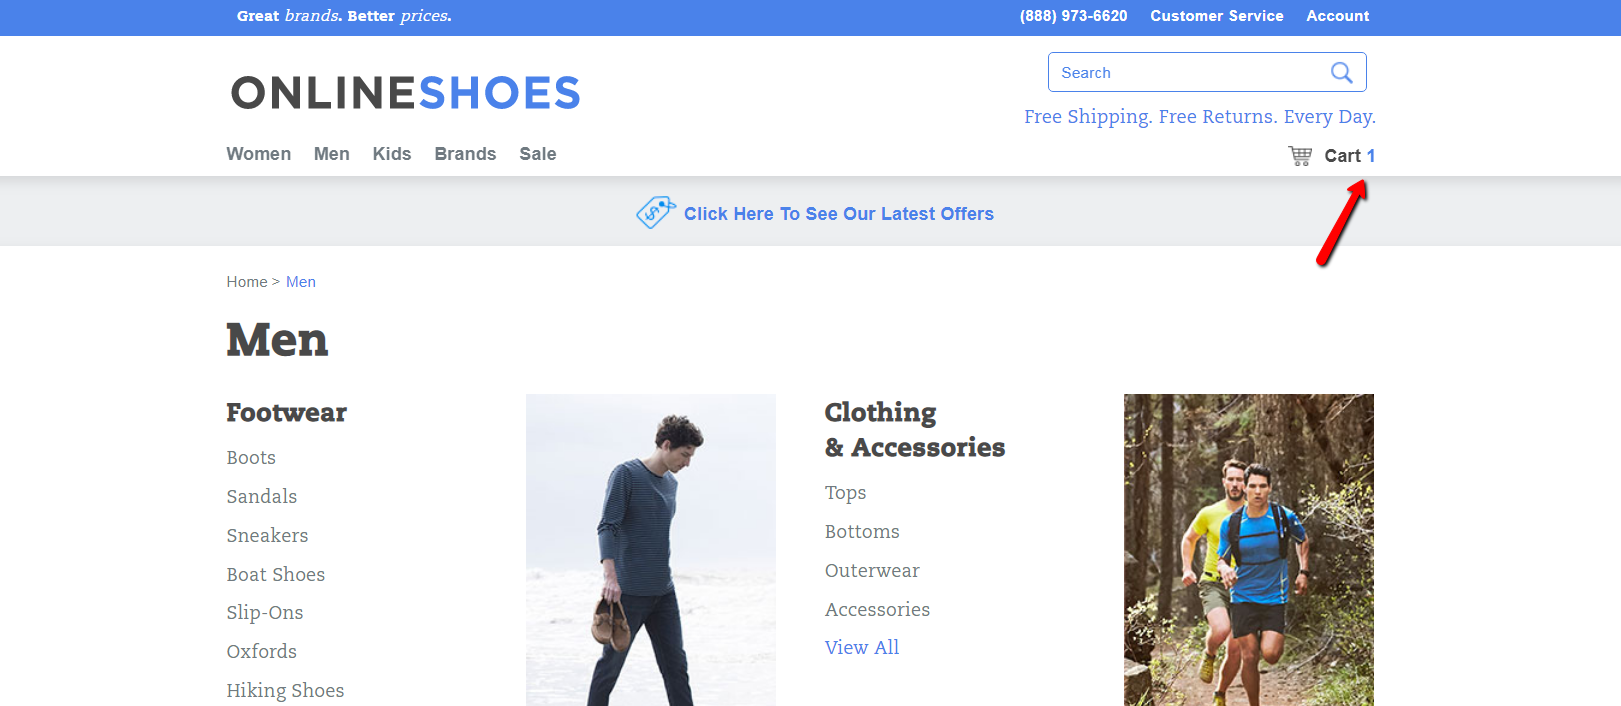 How to Increase Ecommerce Conversion Rates